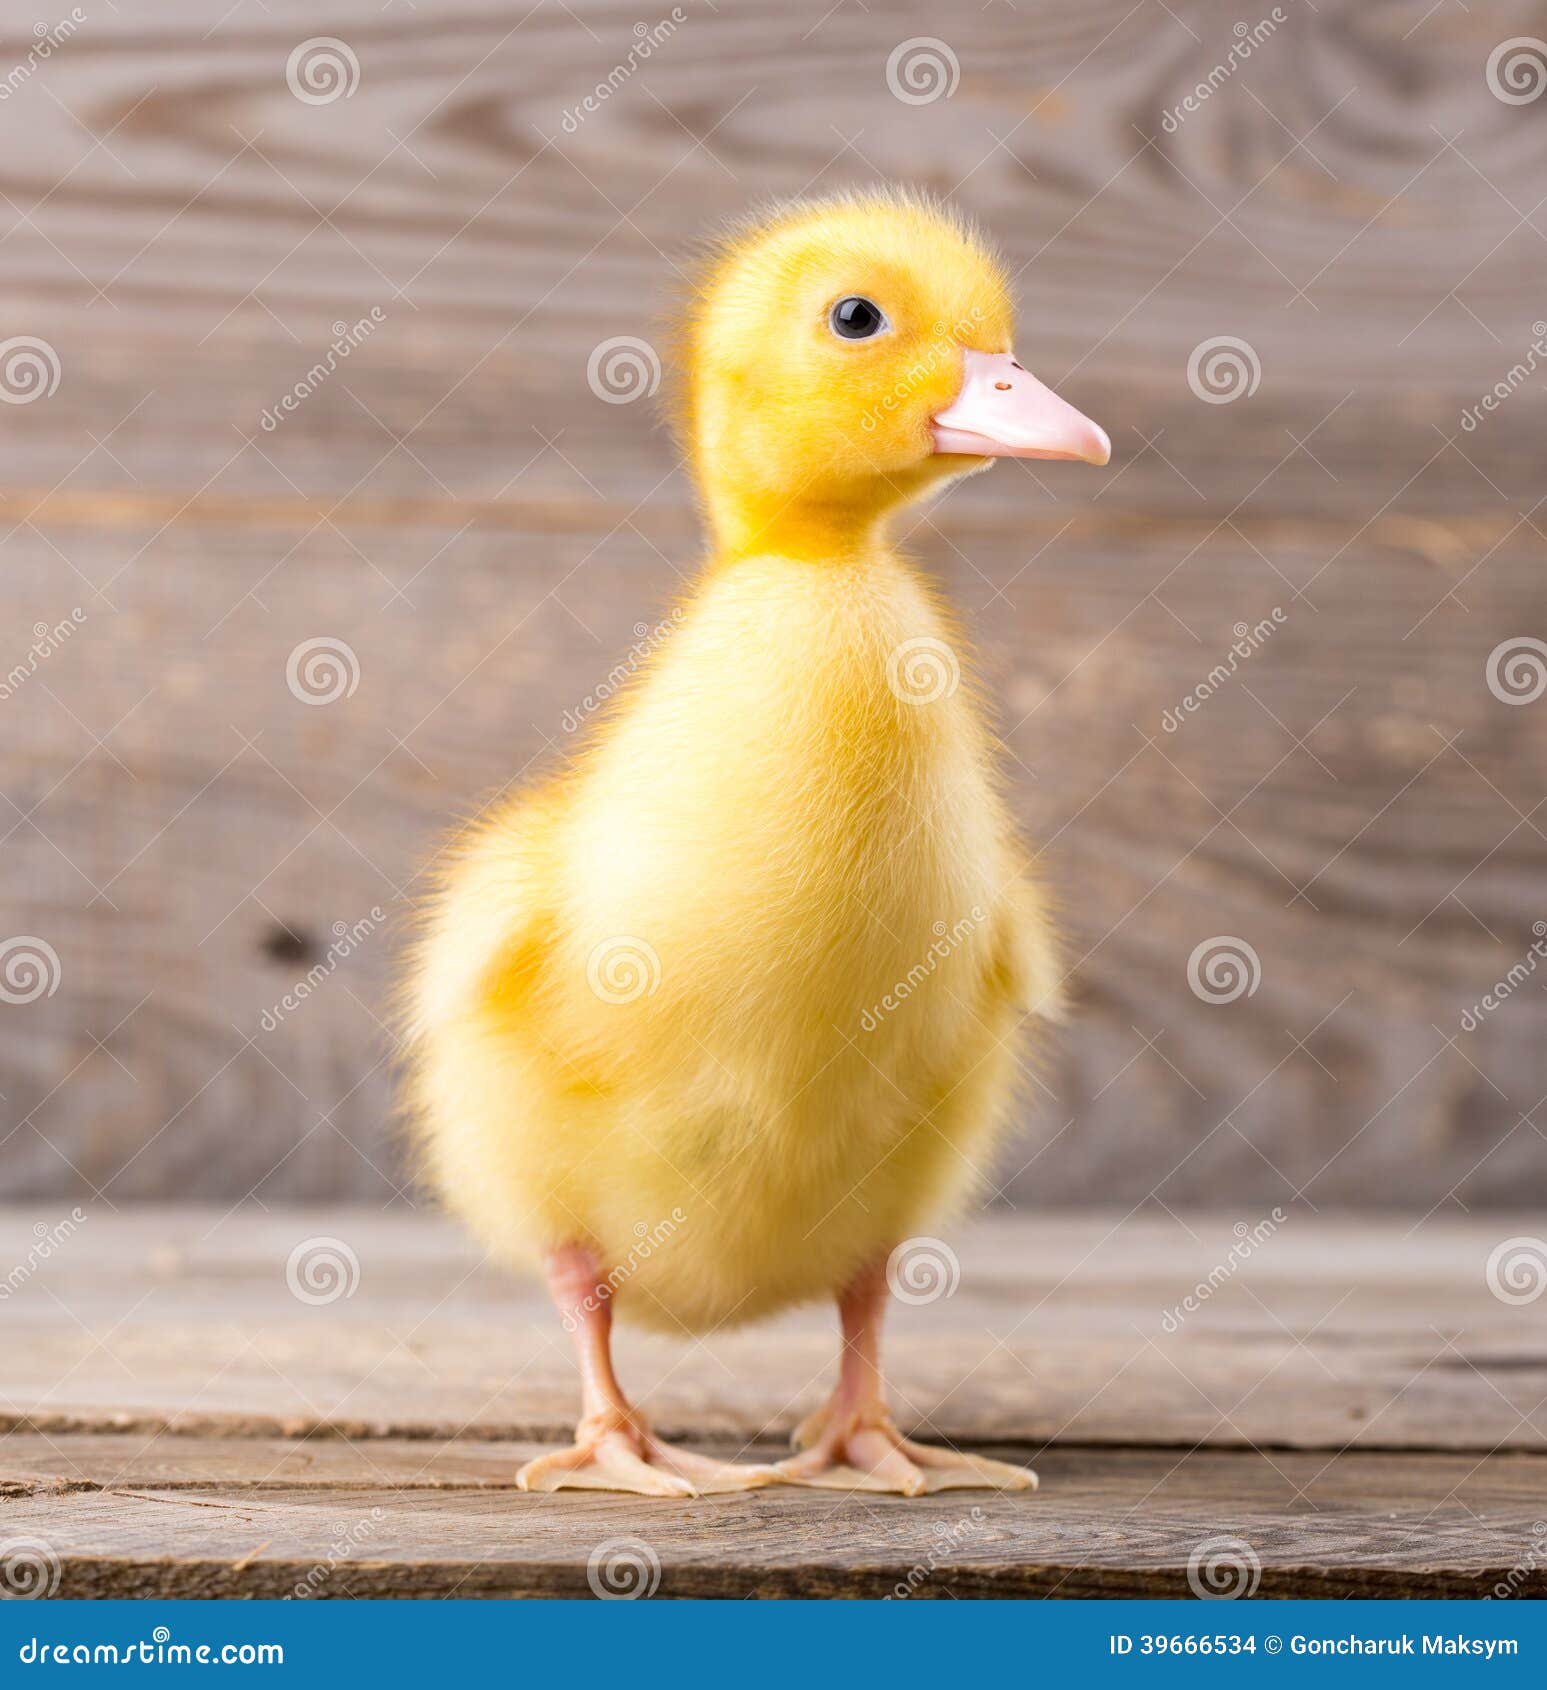 Little yellow duckling stock photo. Image of agriculture 